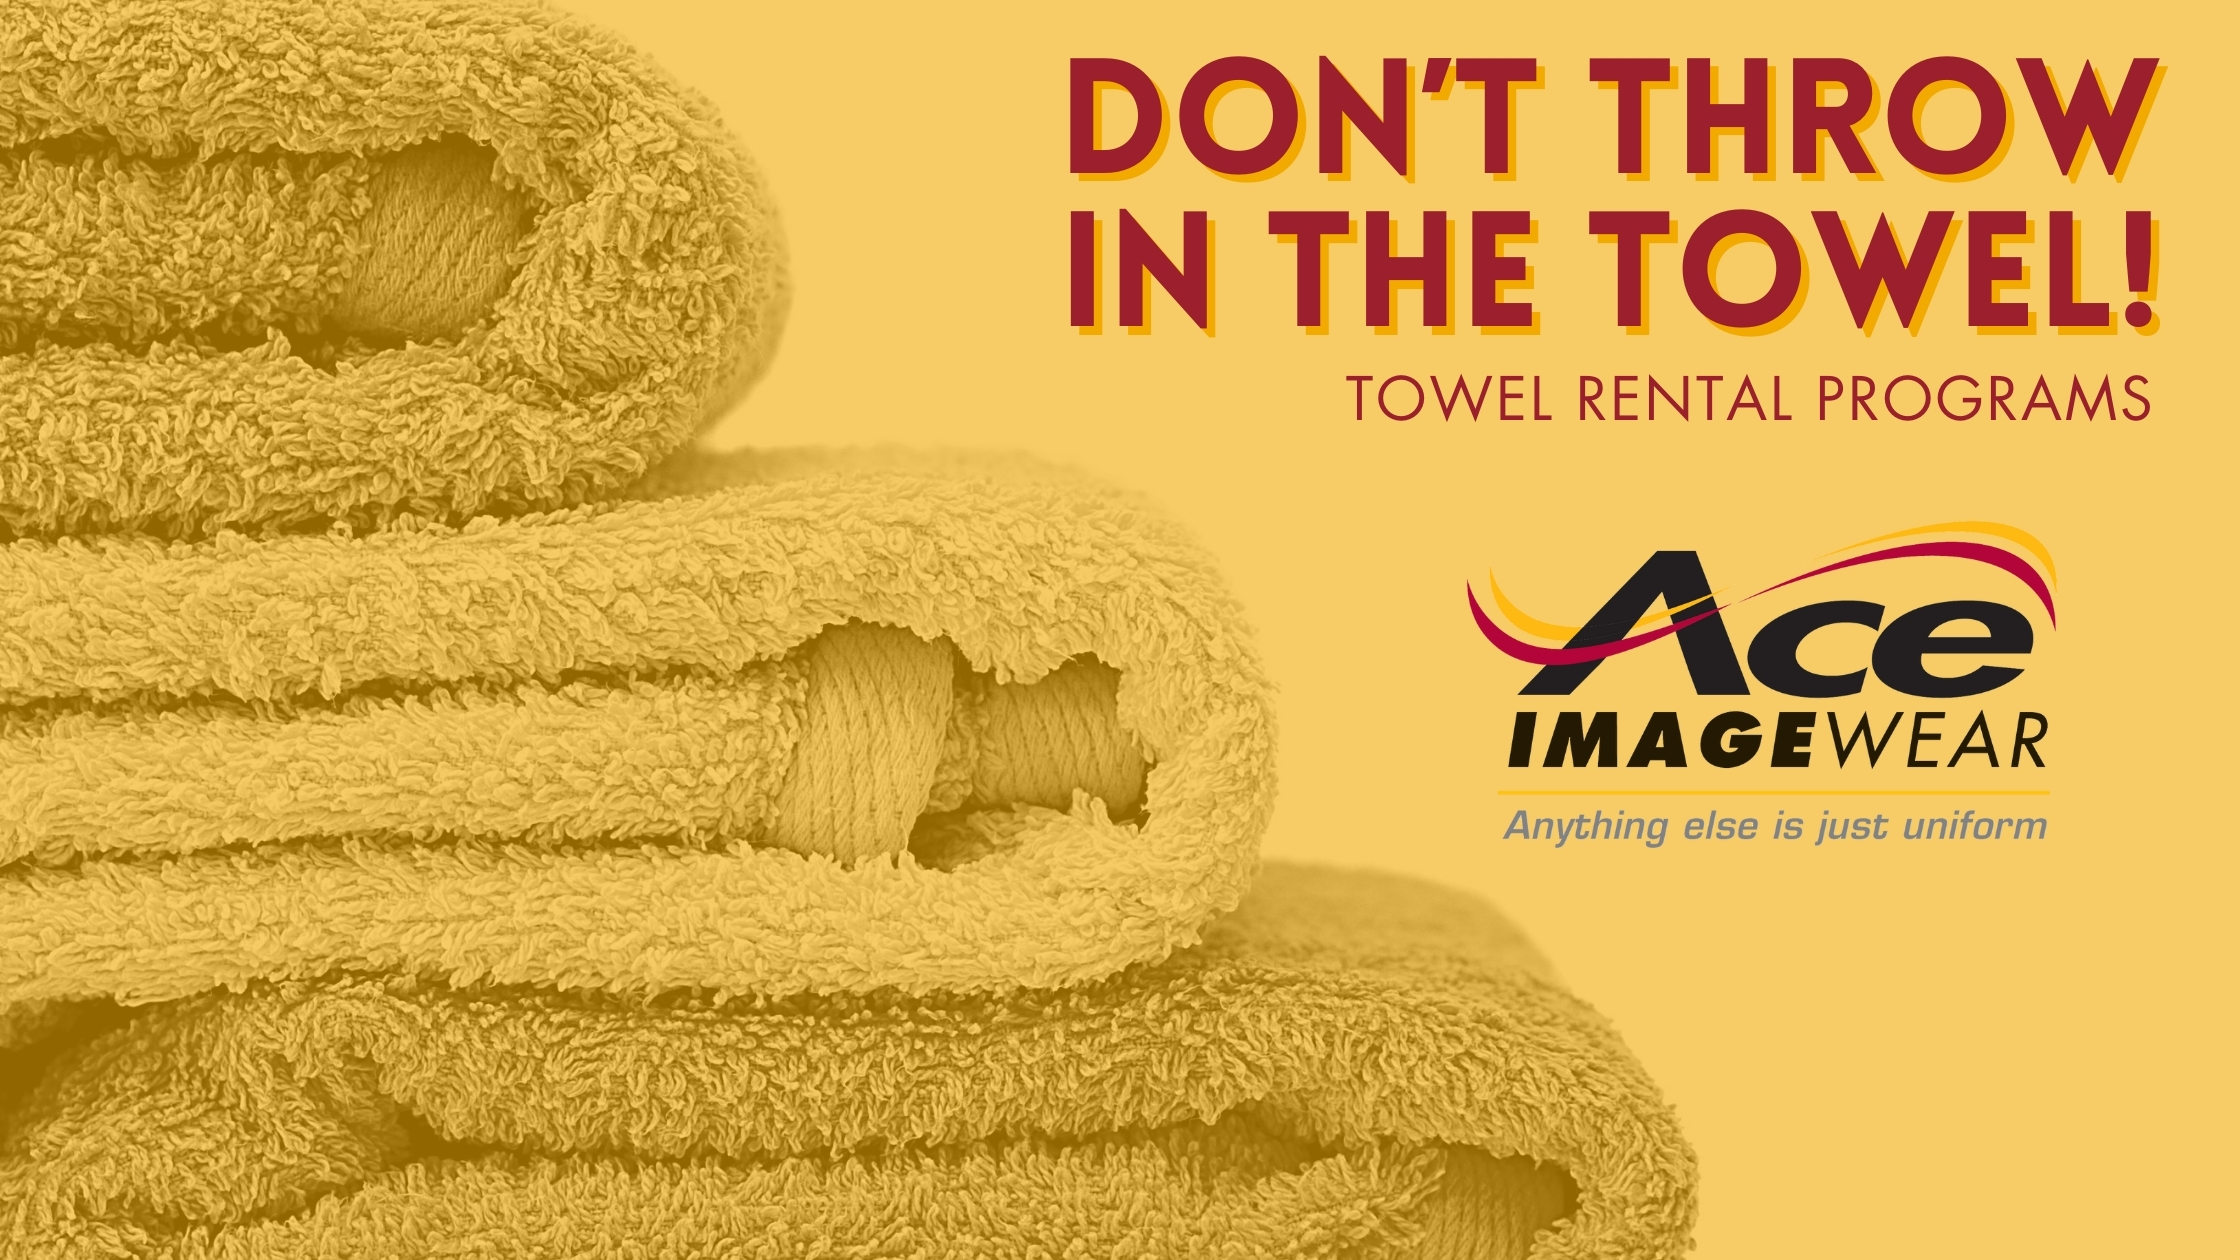 Don’t Throw in The Towel: Towel Rental Programs from Ace